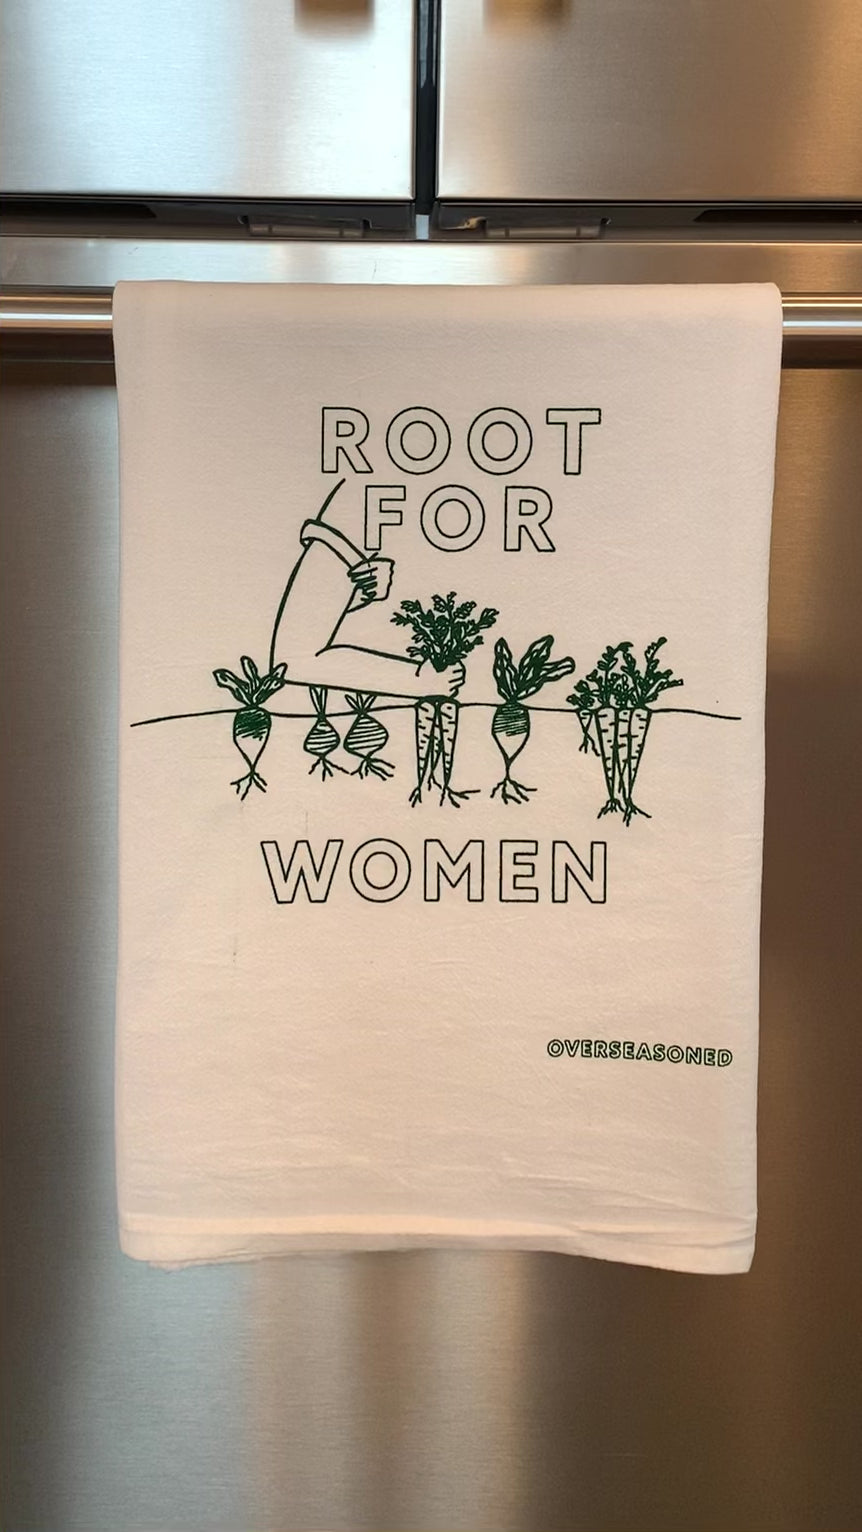 A white tea towel with "Root for Women" in green block letters hangs in a kitchen